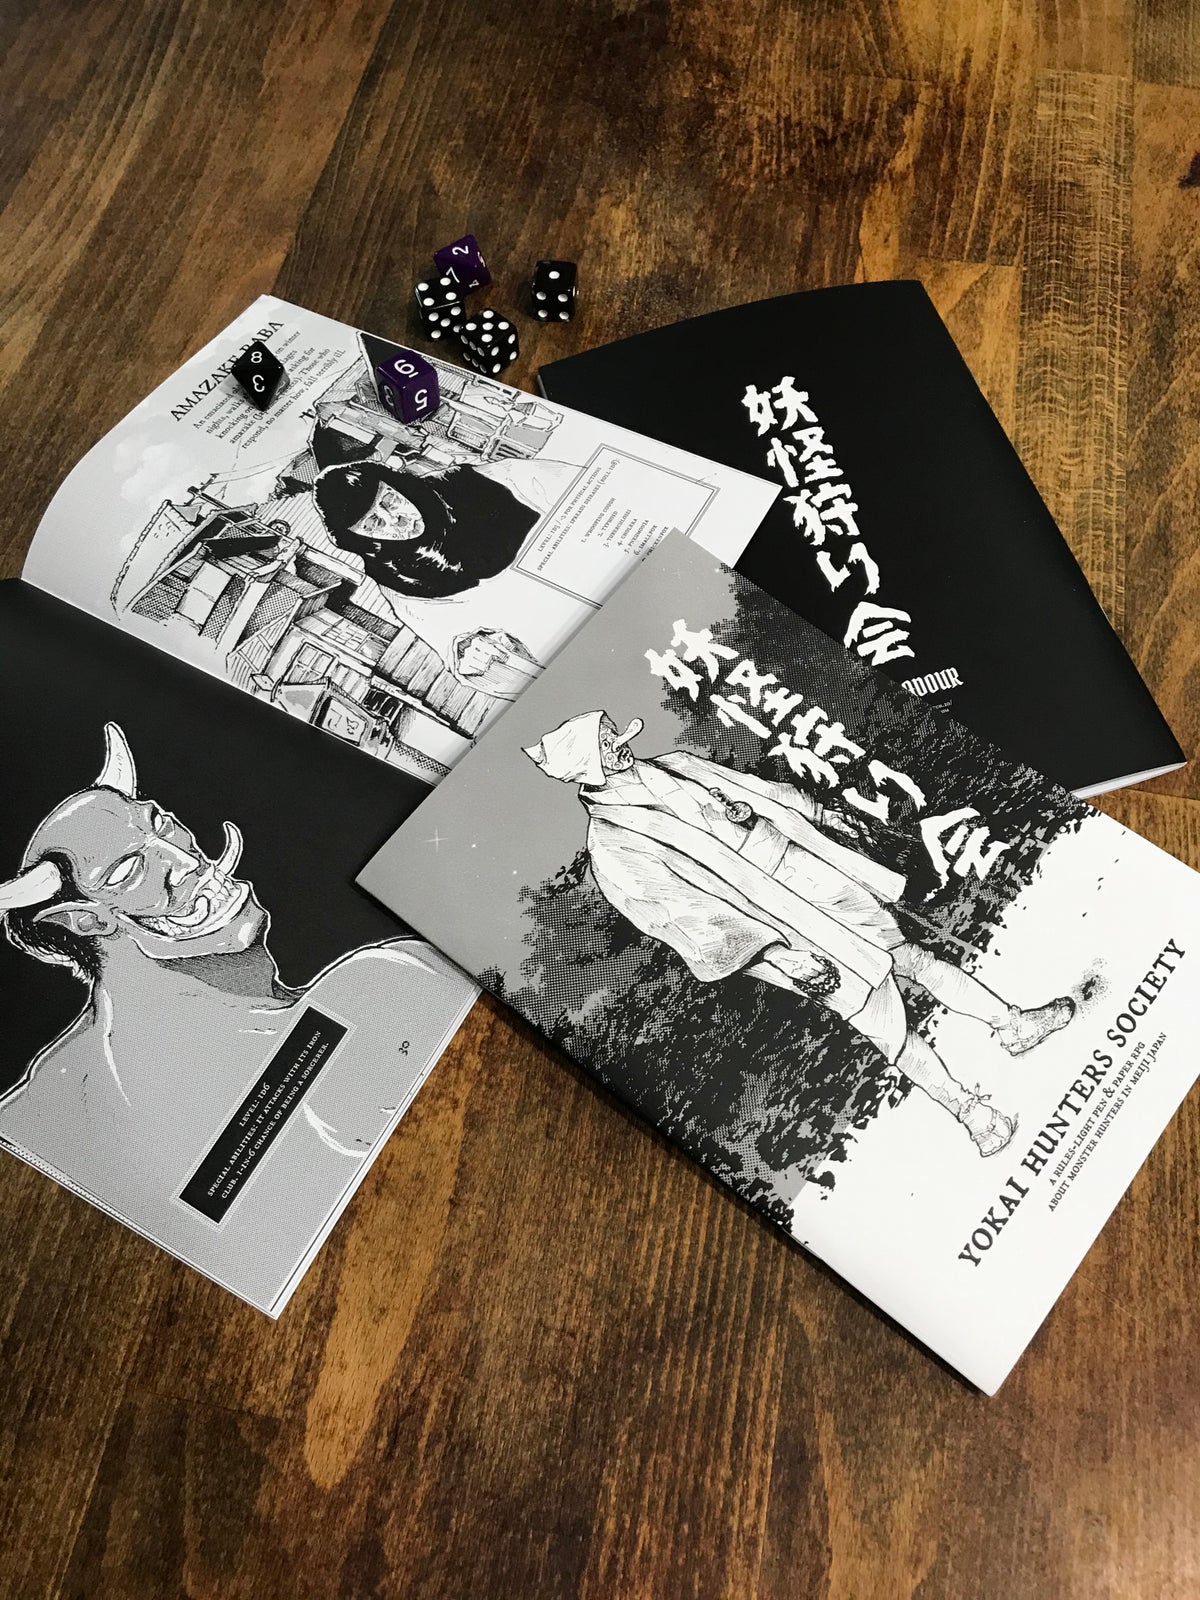 Yokai Hunters Society, a rules-light pen & paper RPG in zine format about Monster Hunting in Meiji Japan. Based on Tunnel Goons by Nate Treme